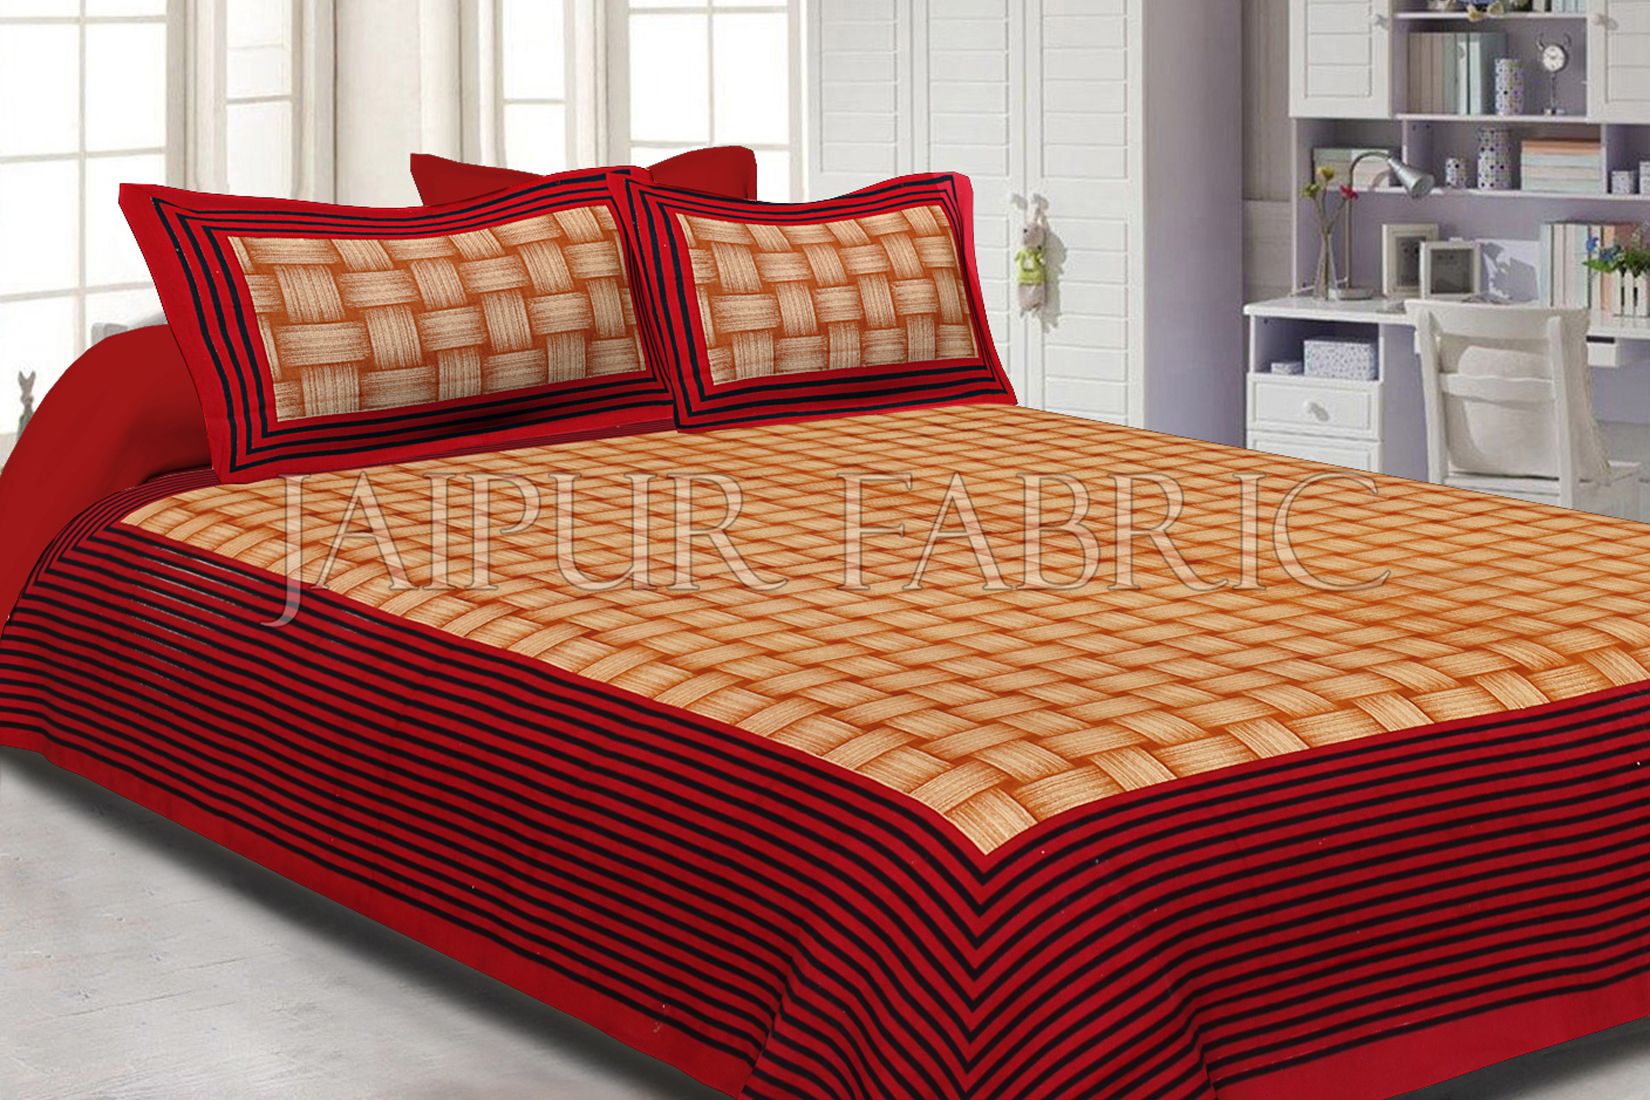 Orange Border With Lining Check Pattern Cotton Double Bed Sheet